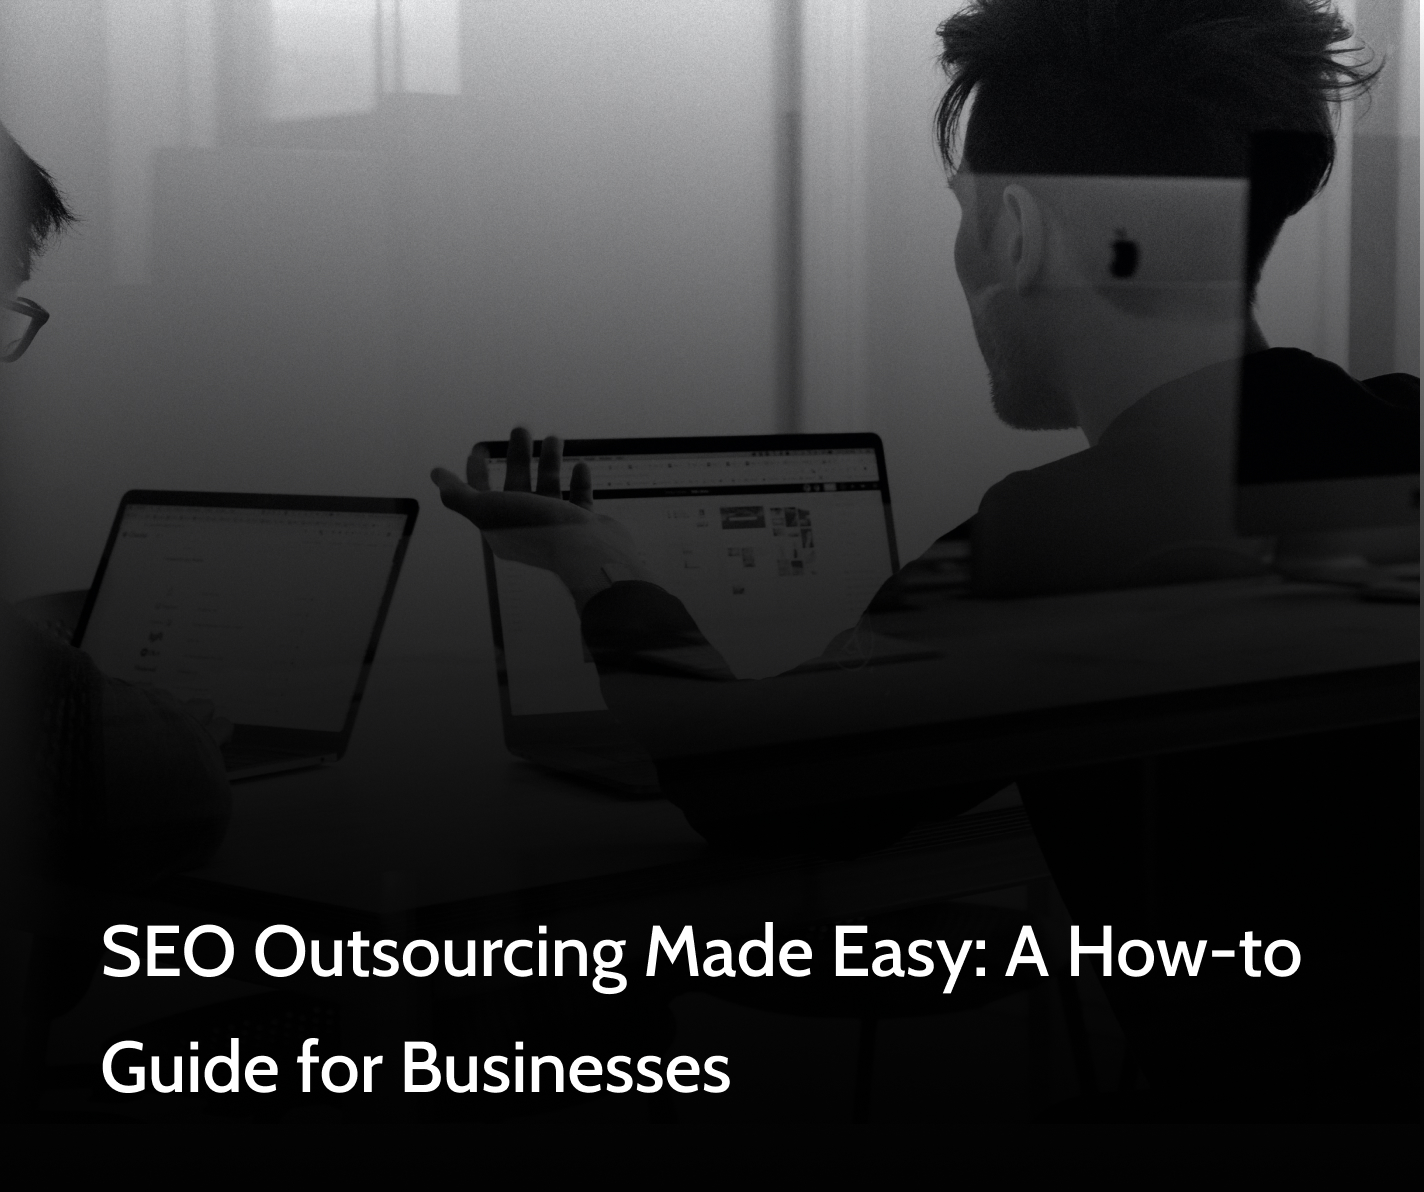 SEO Outsourcing Made Easy: A How-to Guide for Businesses